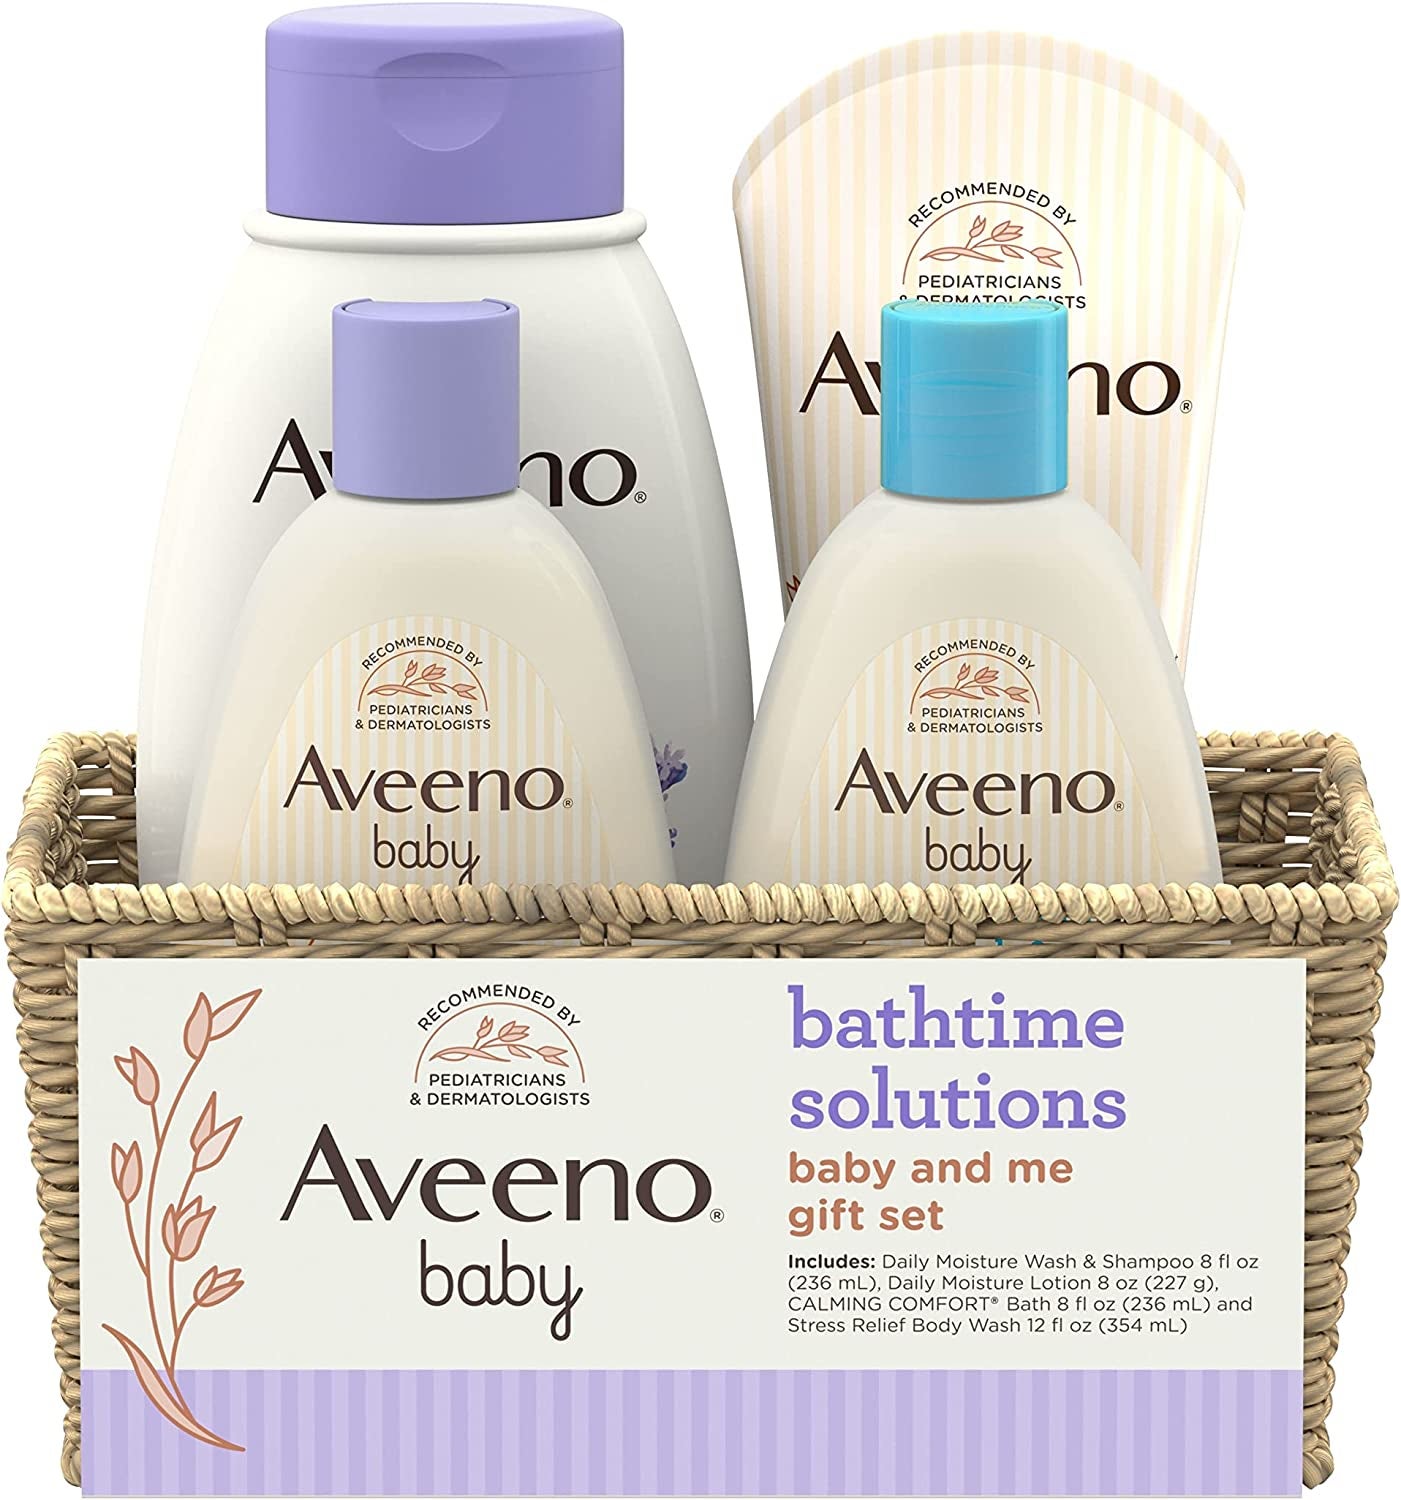 Wicker basket filled with four bottles of baby creams